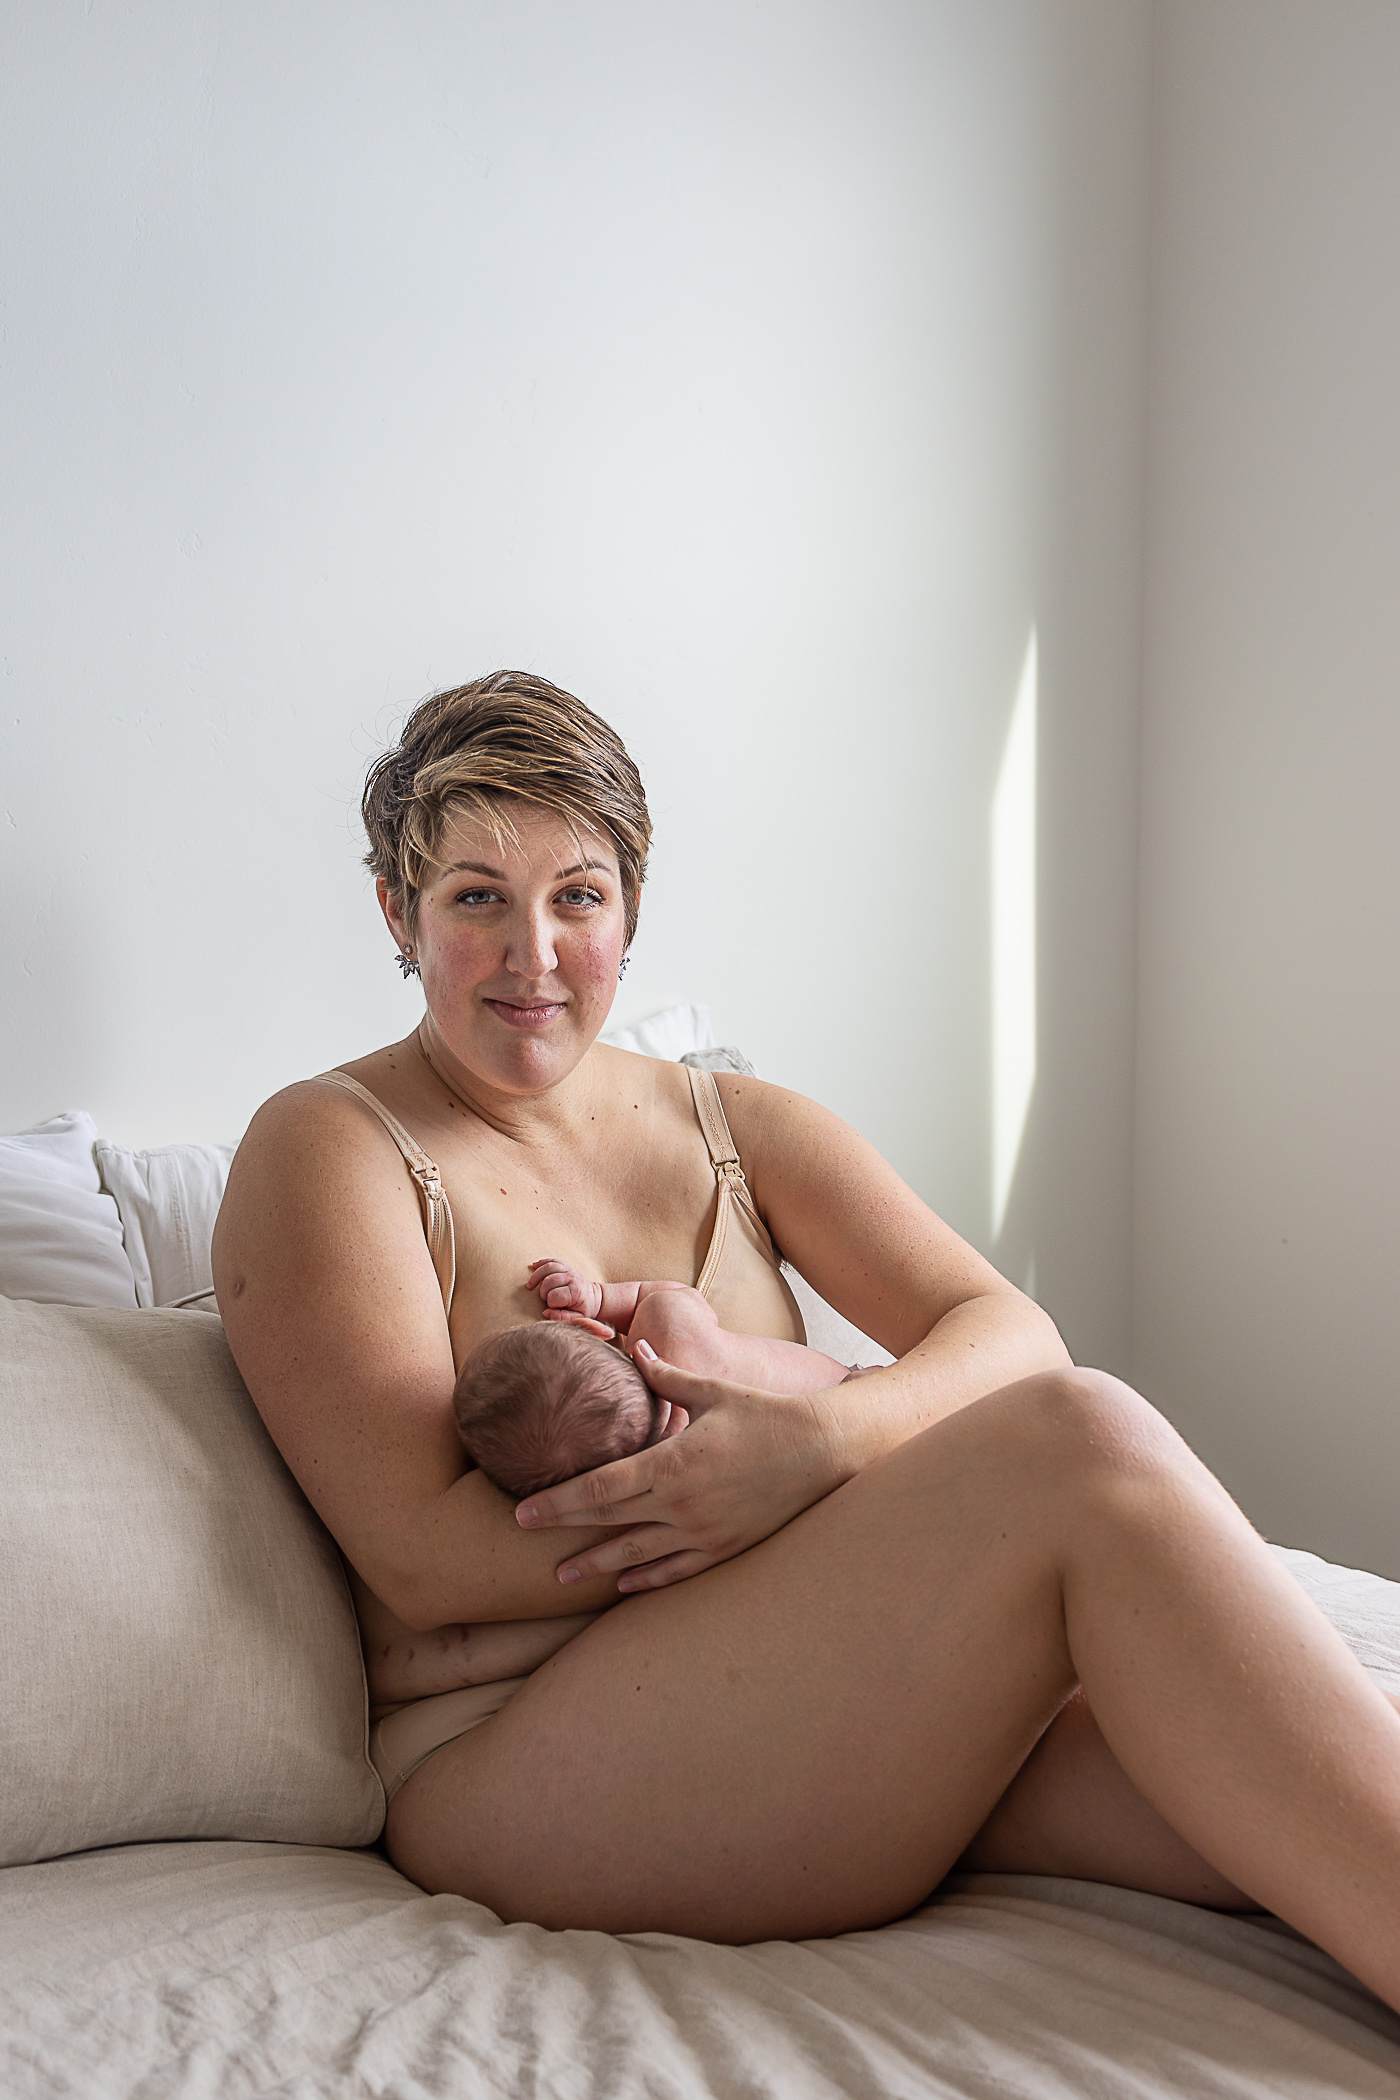 An intimate postpartum breastfeeding portrait; mom is sitting on a soft linen bed, wearing nude underwear and looks directly at the camera as her baby feeds at her breast. She is confident and brimming with self-love.